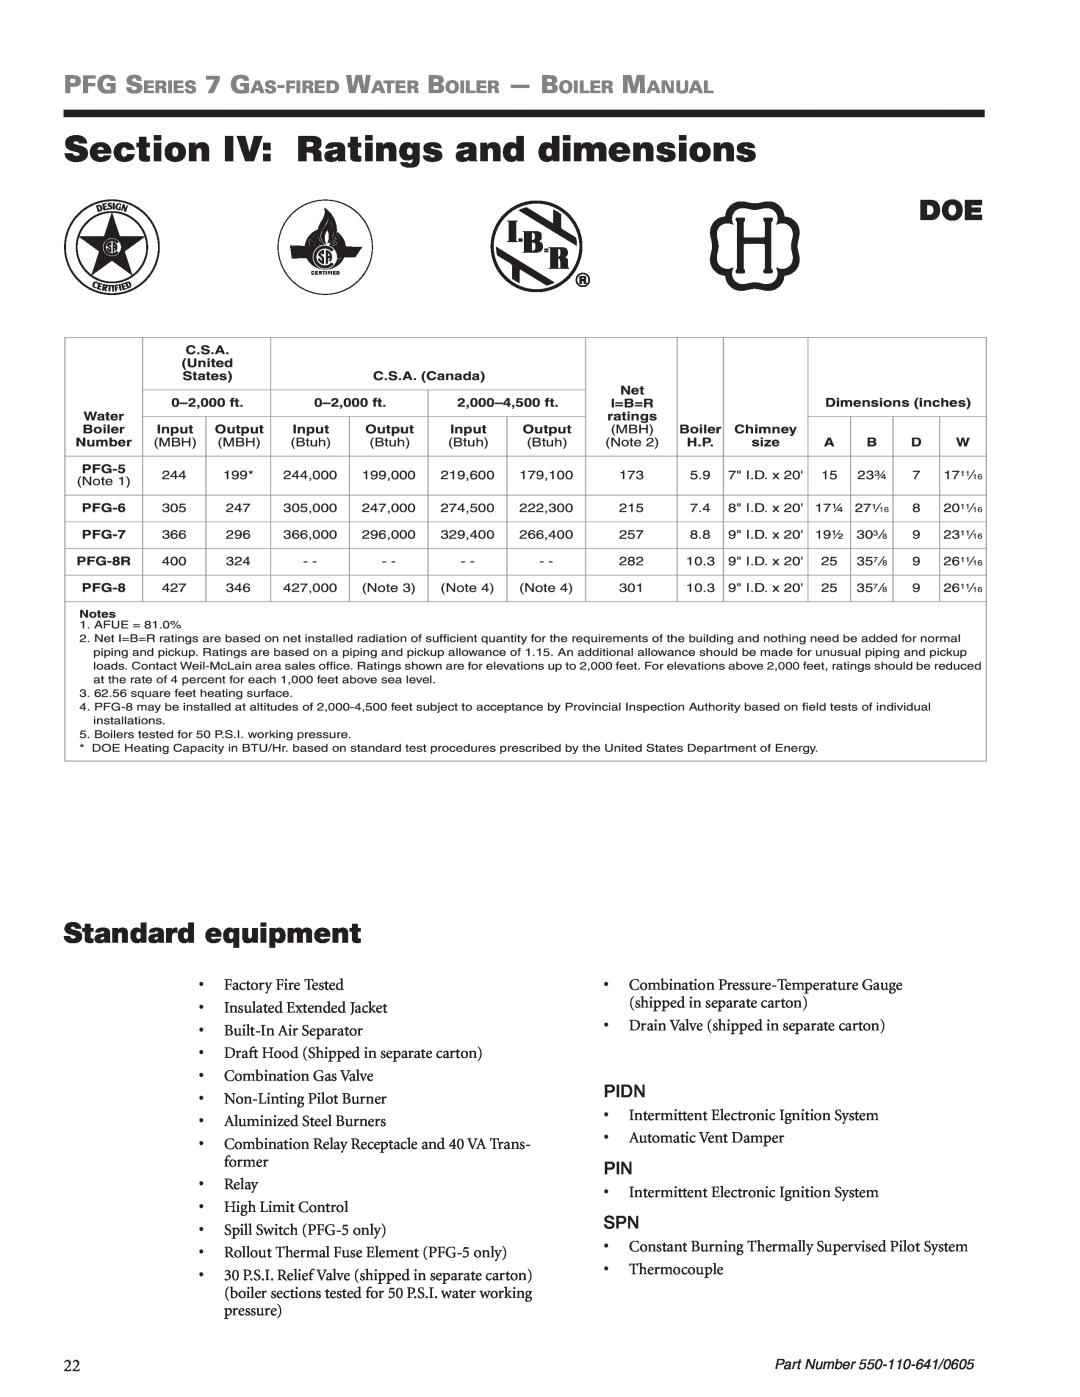 Weil-McLain PFG-7 manual Section IV Ratings and dimensions, Pidn, Standard equipment 